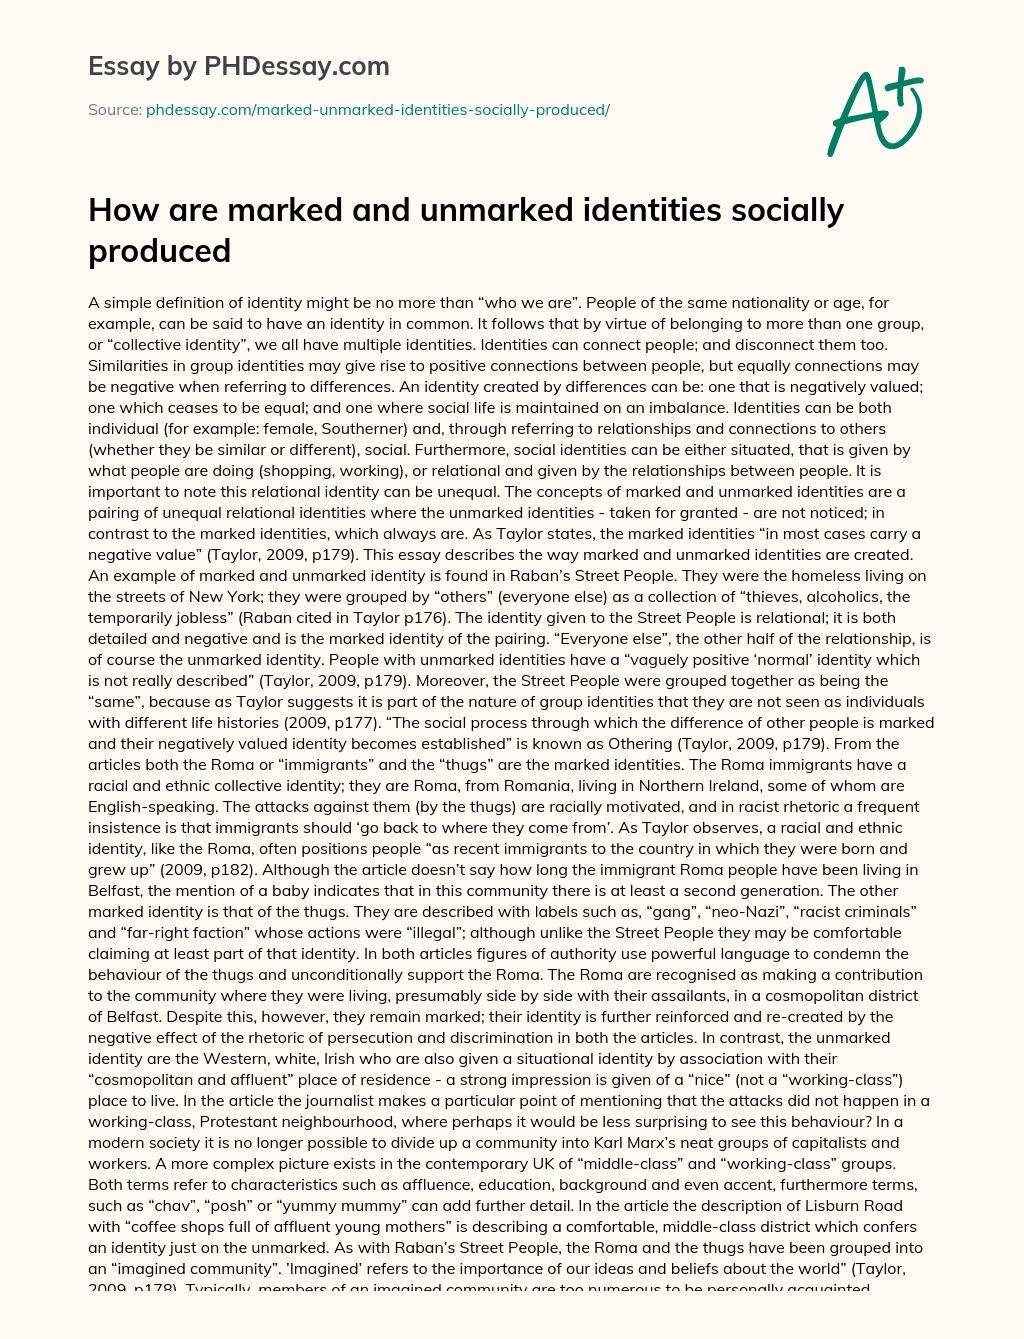 How are marked and unmarked identities socially produced essay